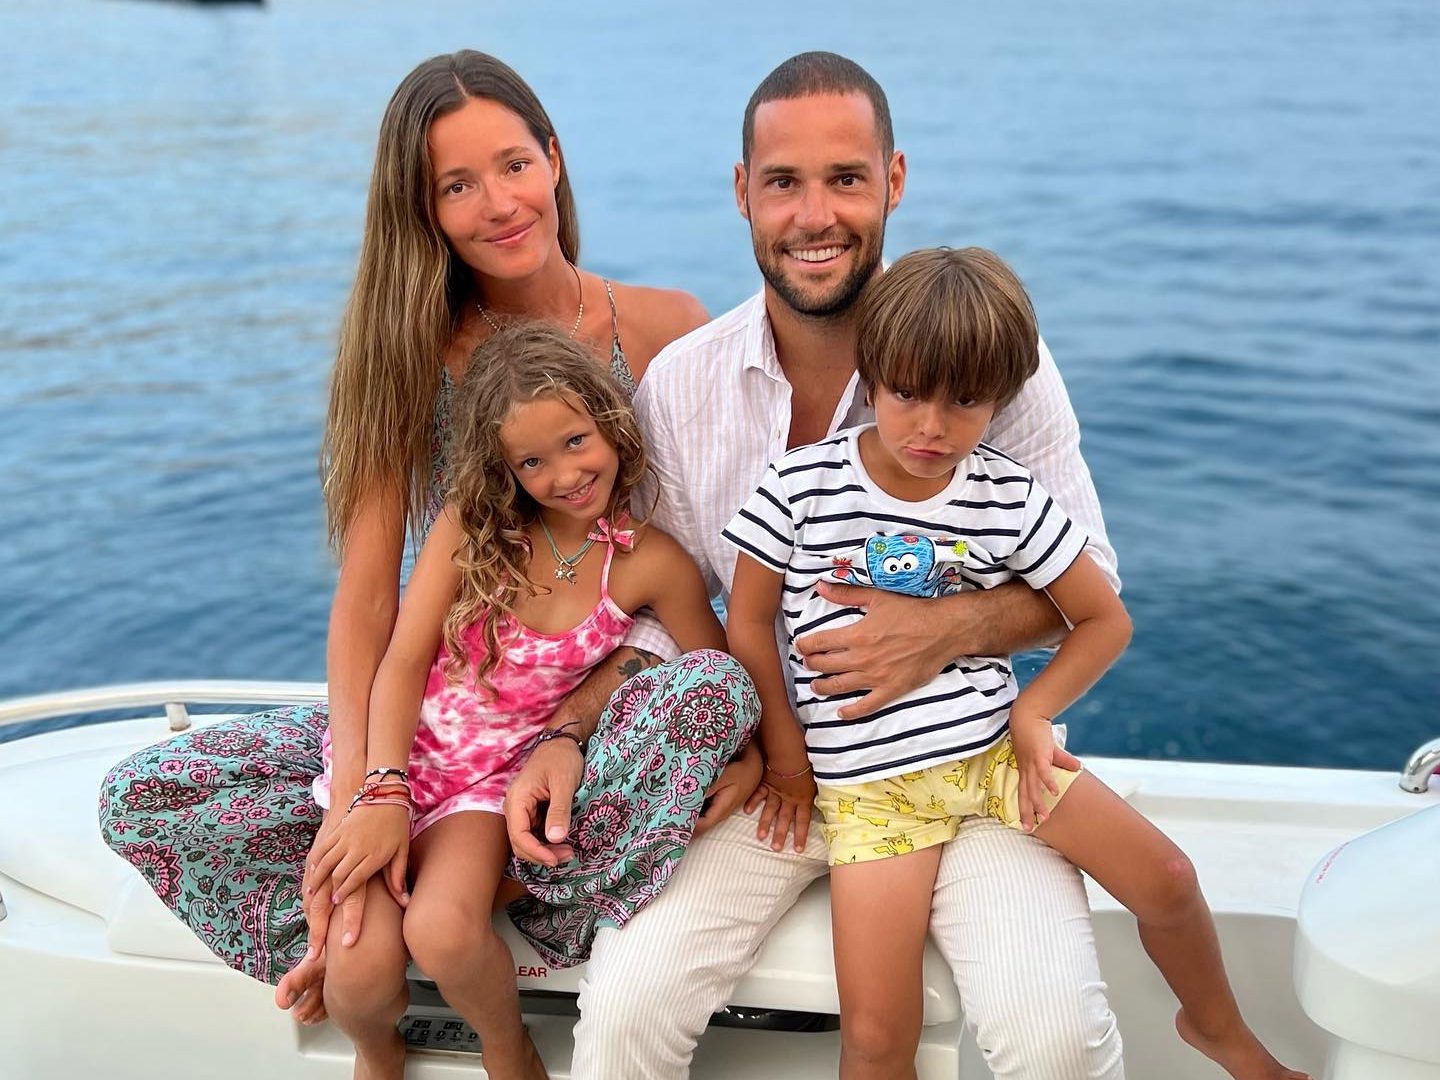 Mario Suarez with his wife and children. (Credit: Instagram)